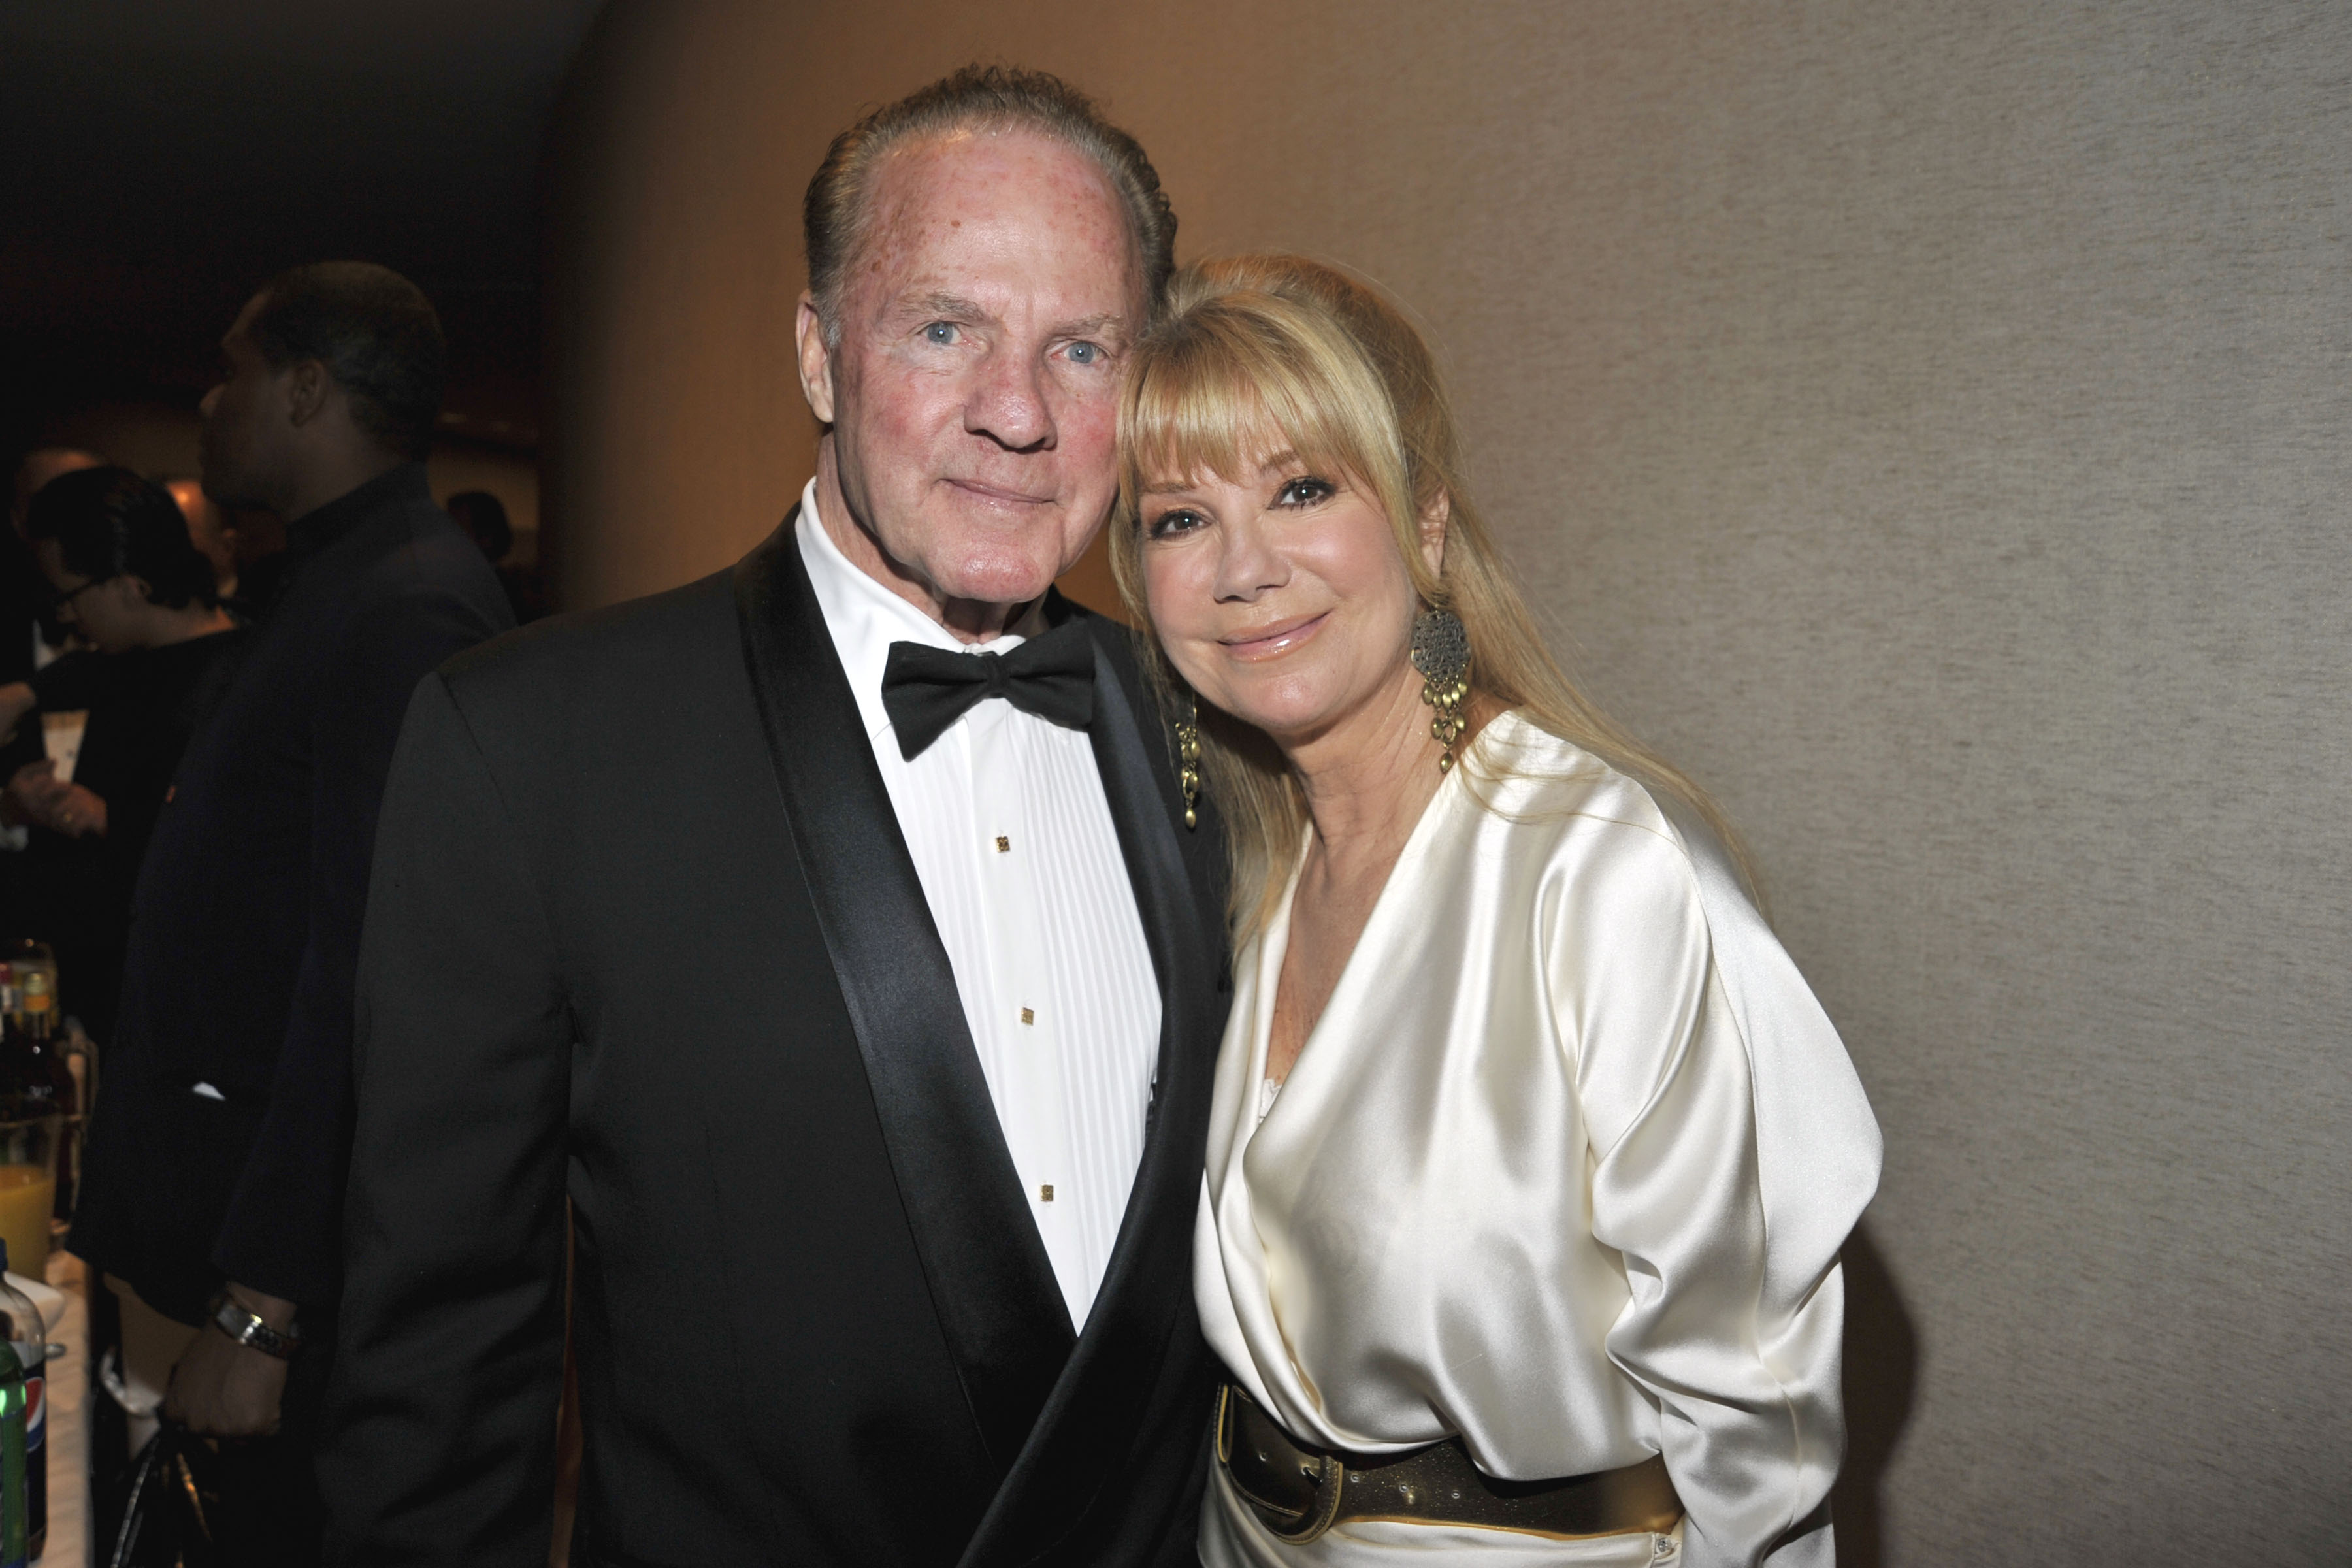 Frank Gifford and Kathie Lee Gifford attend(s) Literacy Partners Evening of Readings Gala at David H. Koch Theater on May 10th, 2010 in New York City | Source: Getty Images